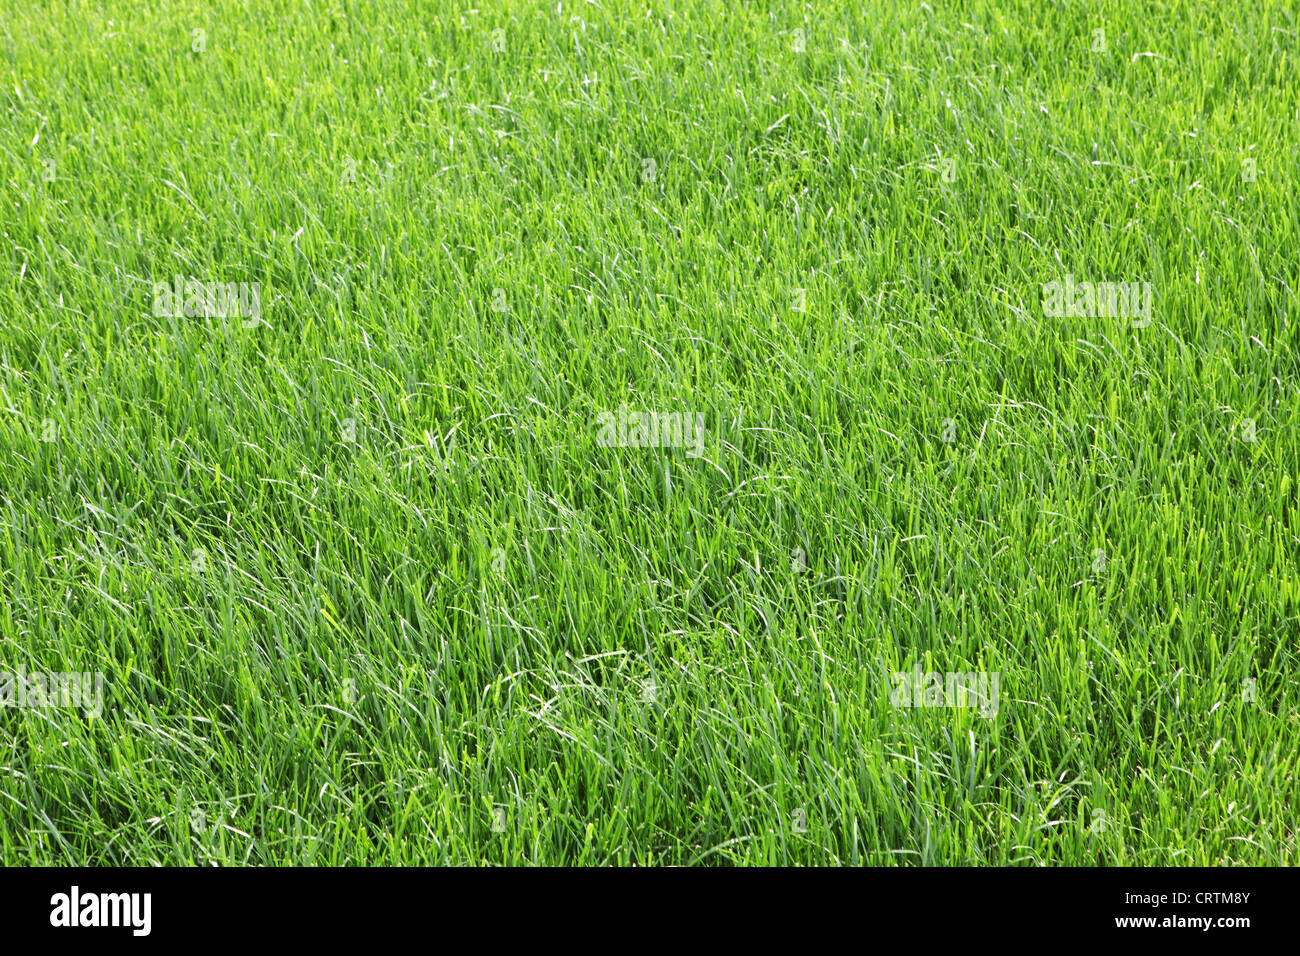 Texture green young grass Stock Photo